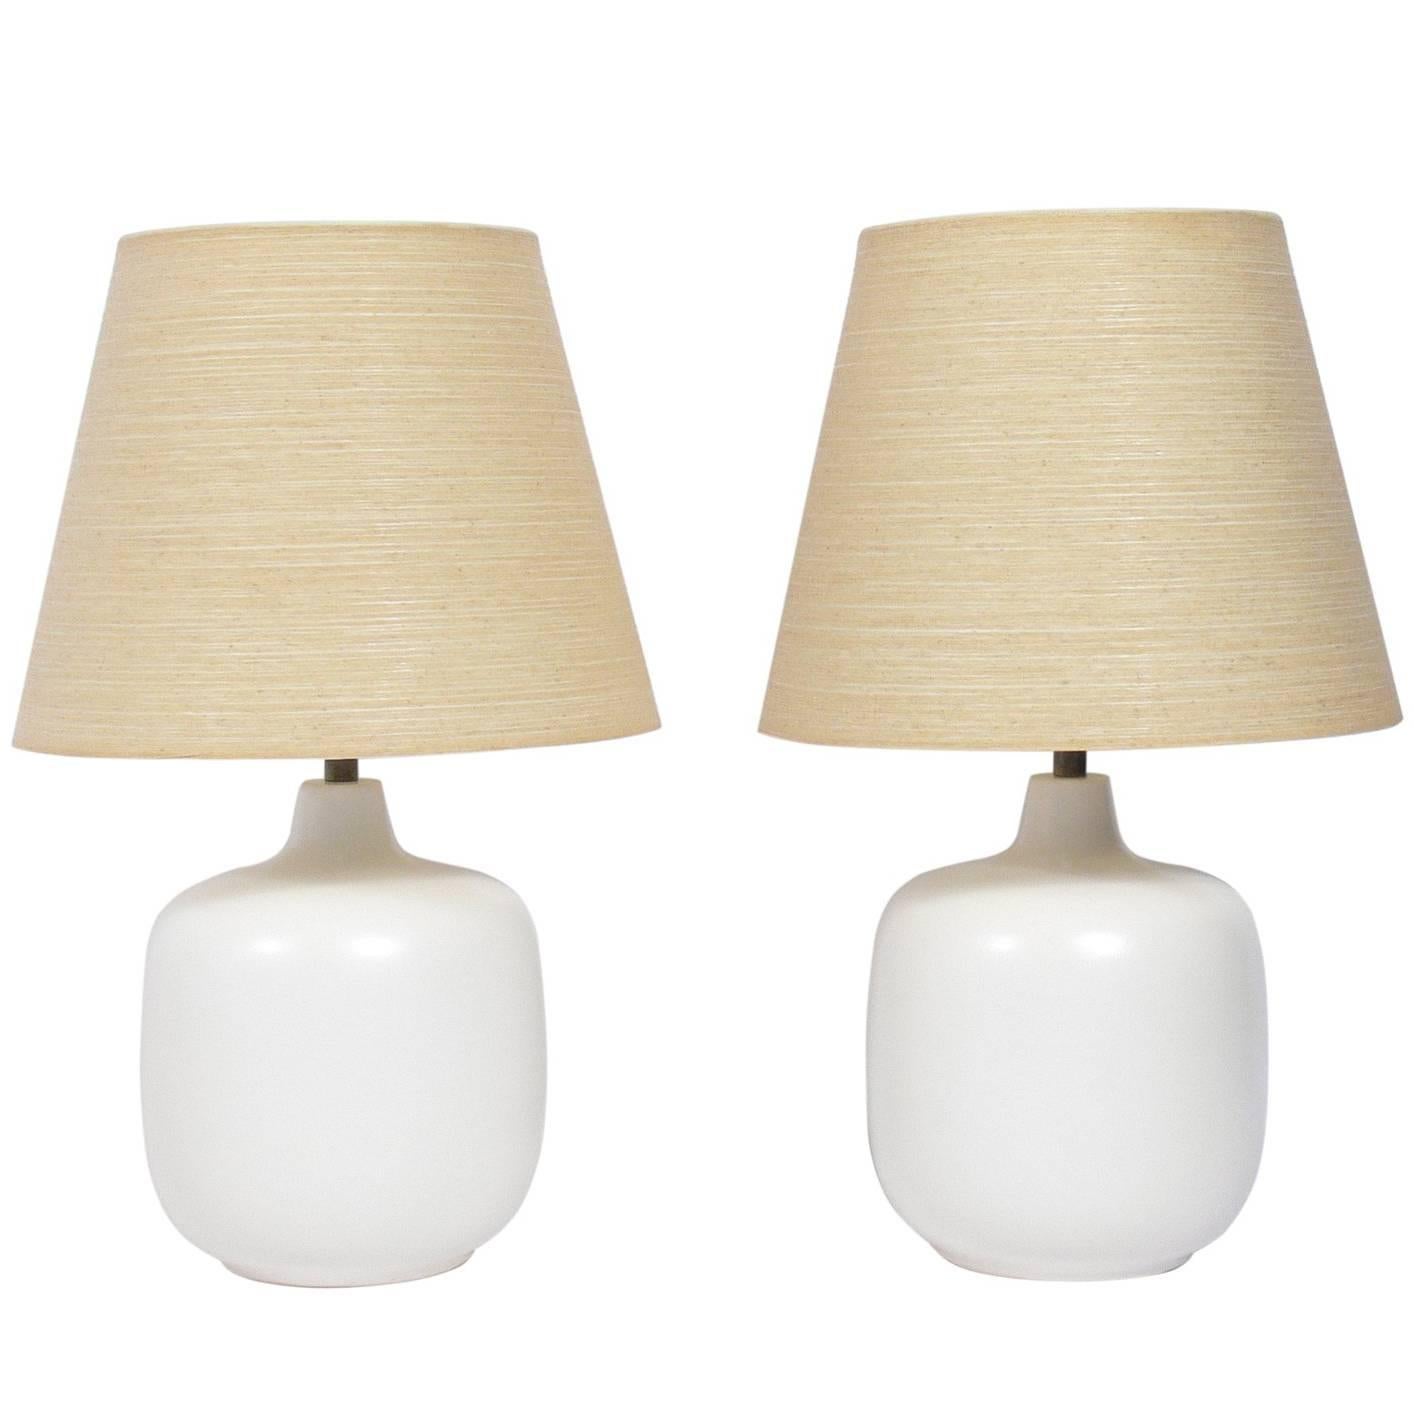 Pair of Danish Modern Ceramic Lamps by Lotte and Gunnar Bostlund